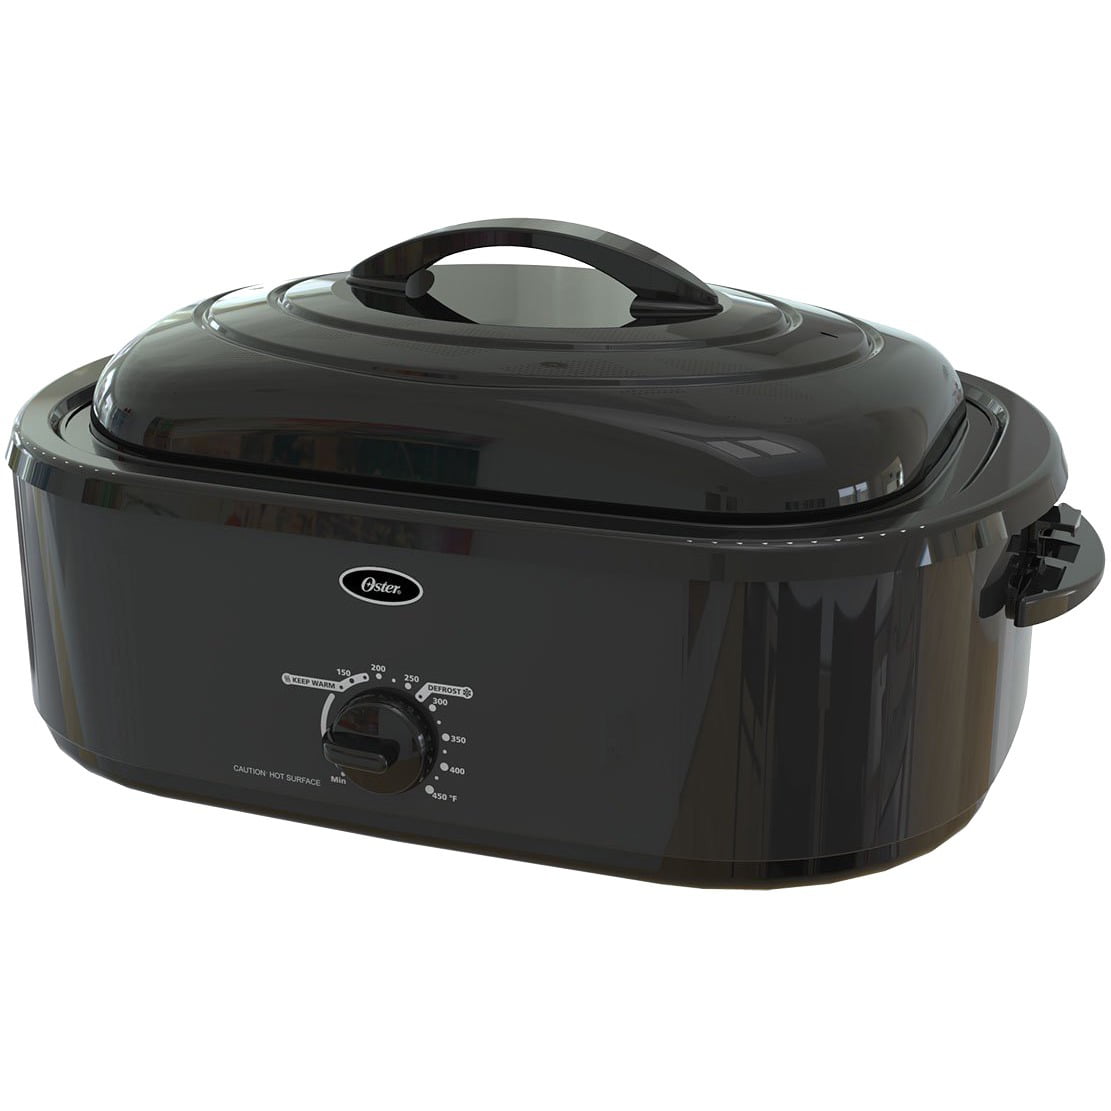 Details about   Rival RO16BSB-033 16 Quart Black Self Basting Roaster Oven/Fits 20lb Turkey-NEW 